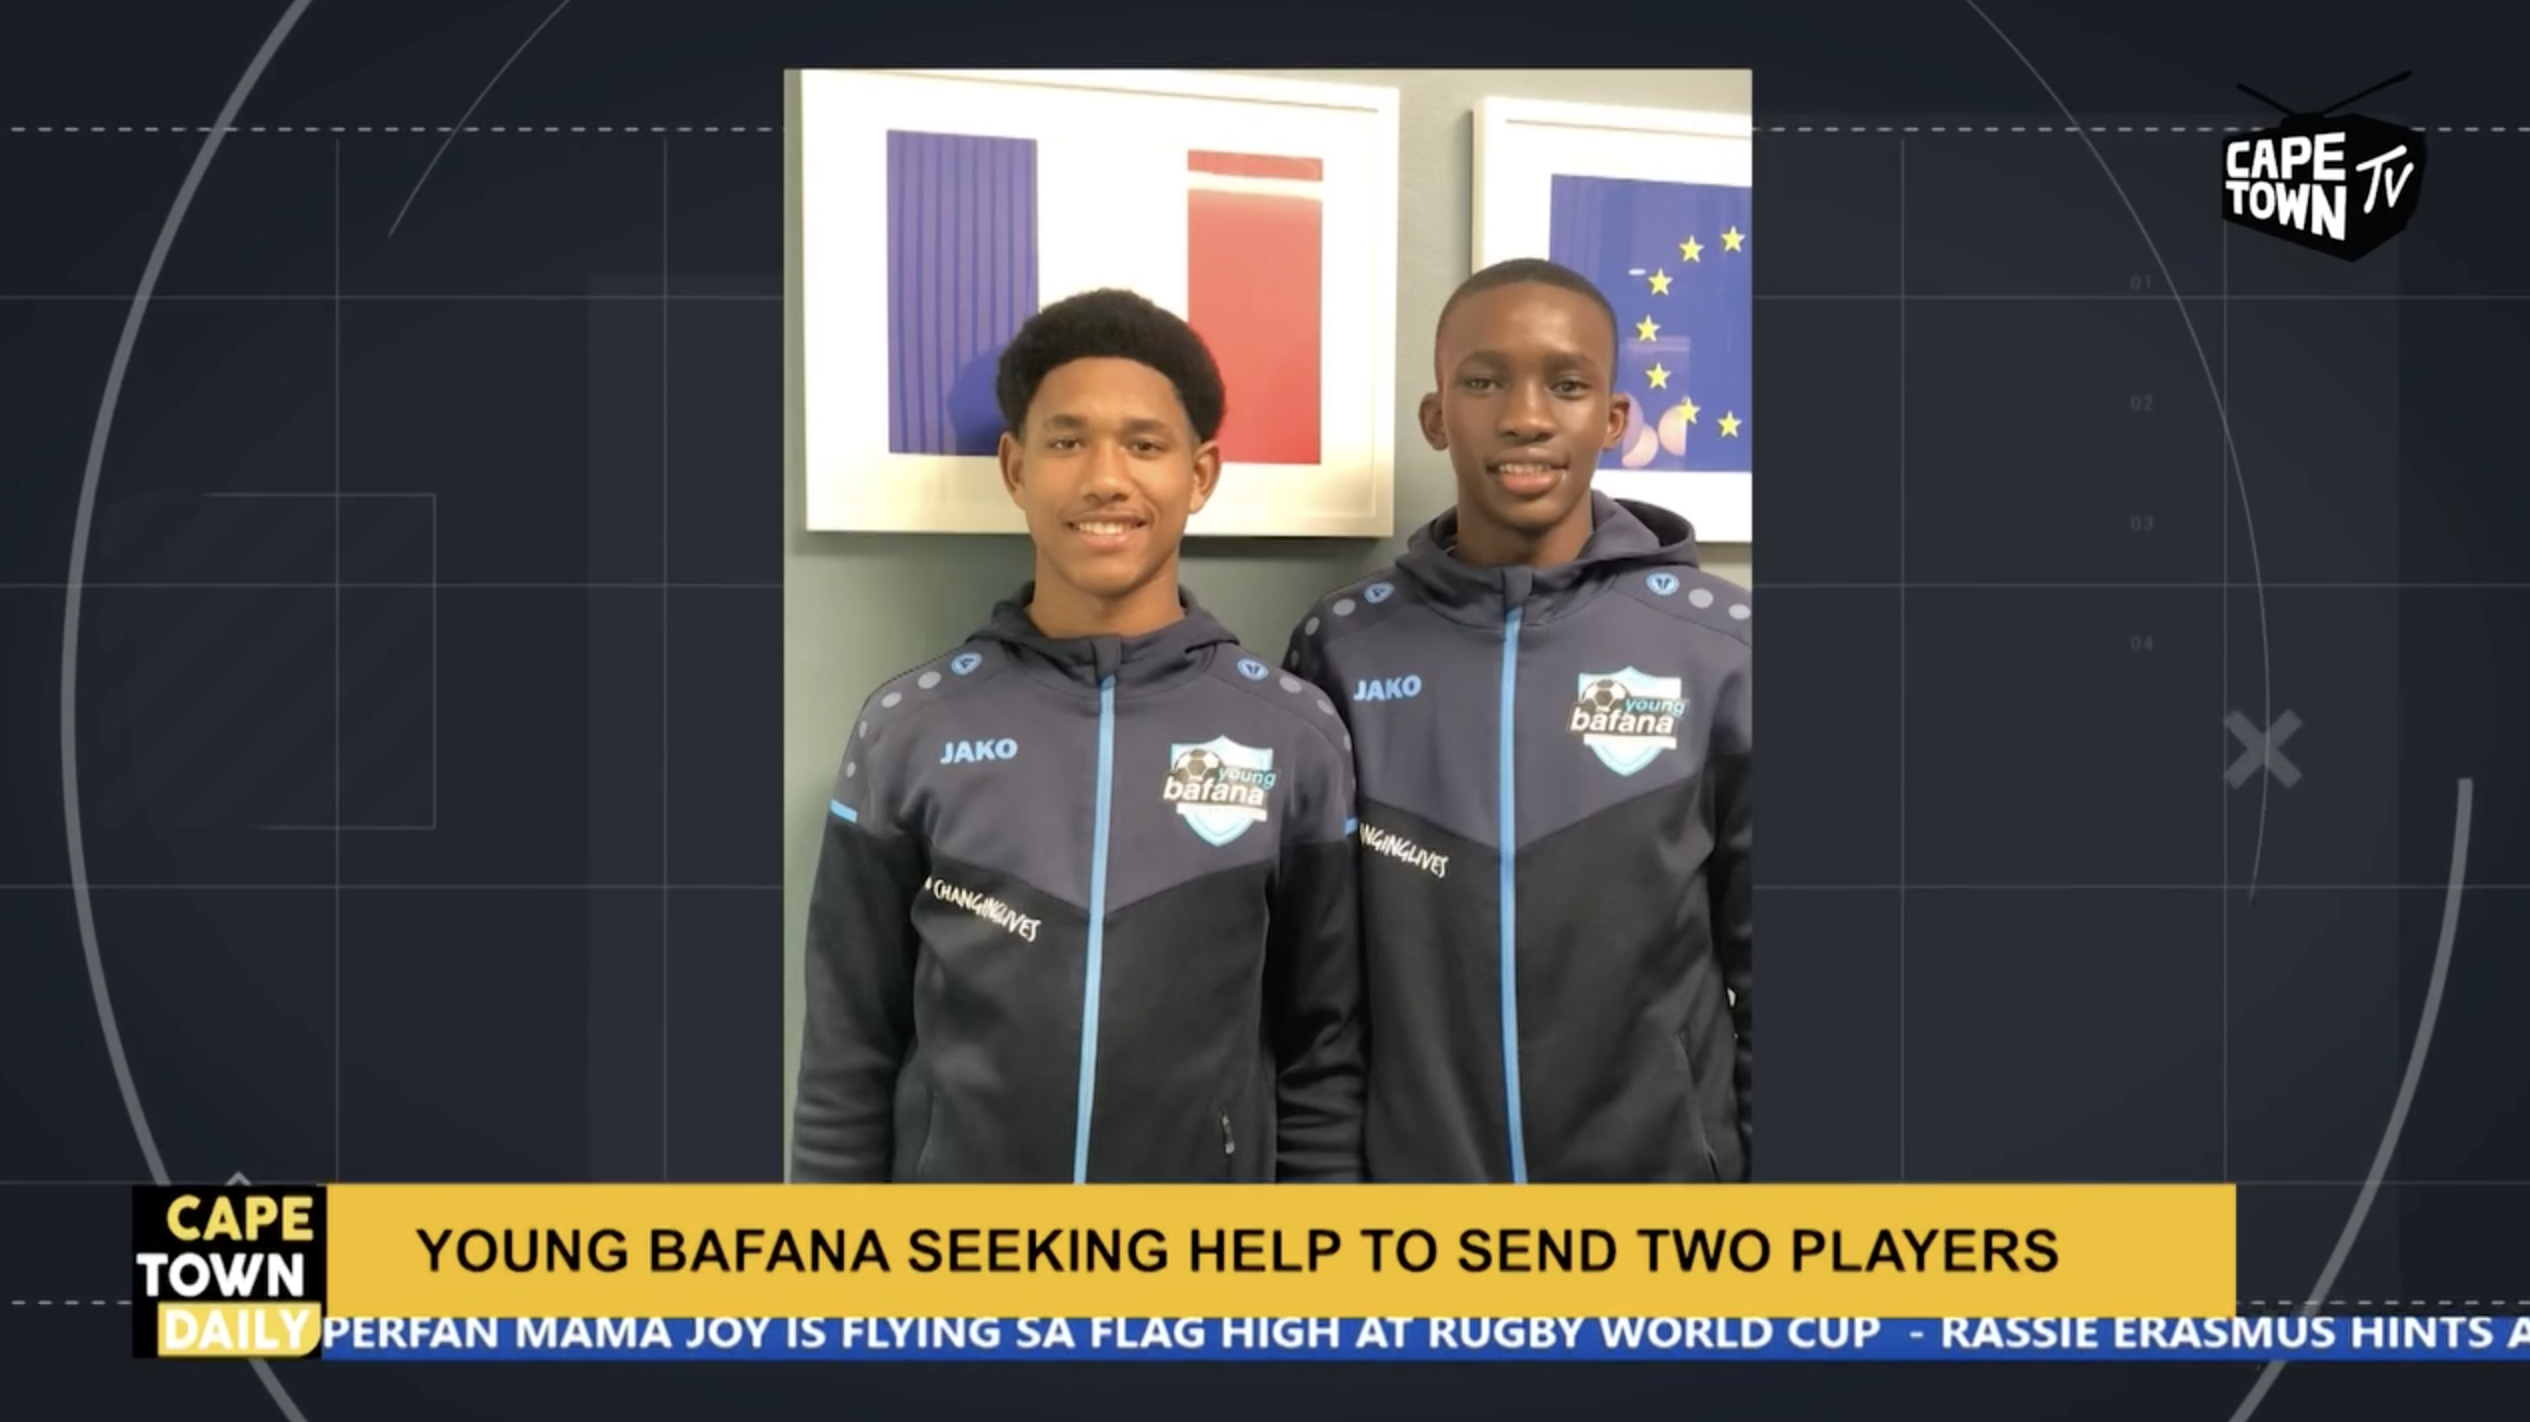 Young Bafana sending 2 players to France - interview on Cape Town TV